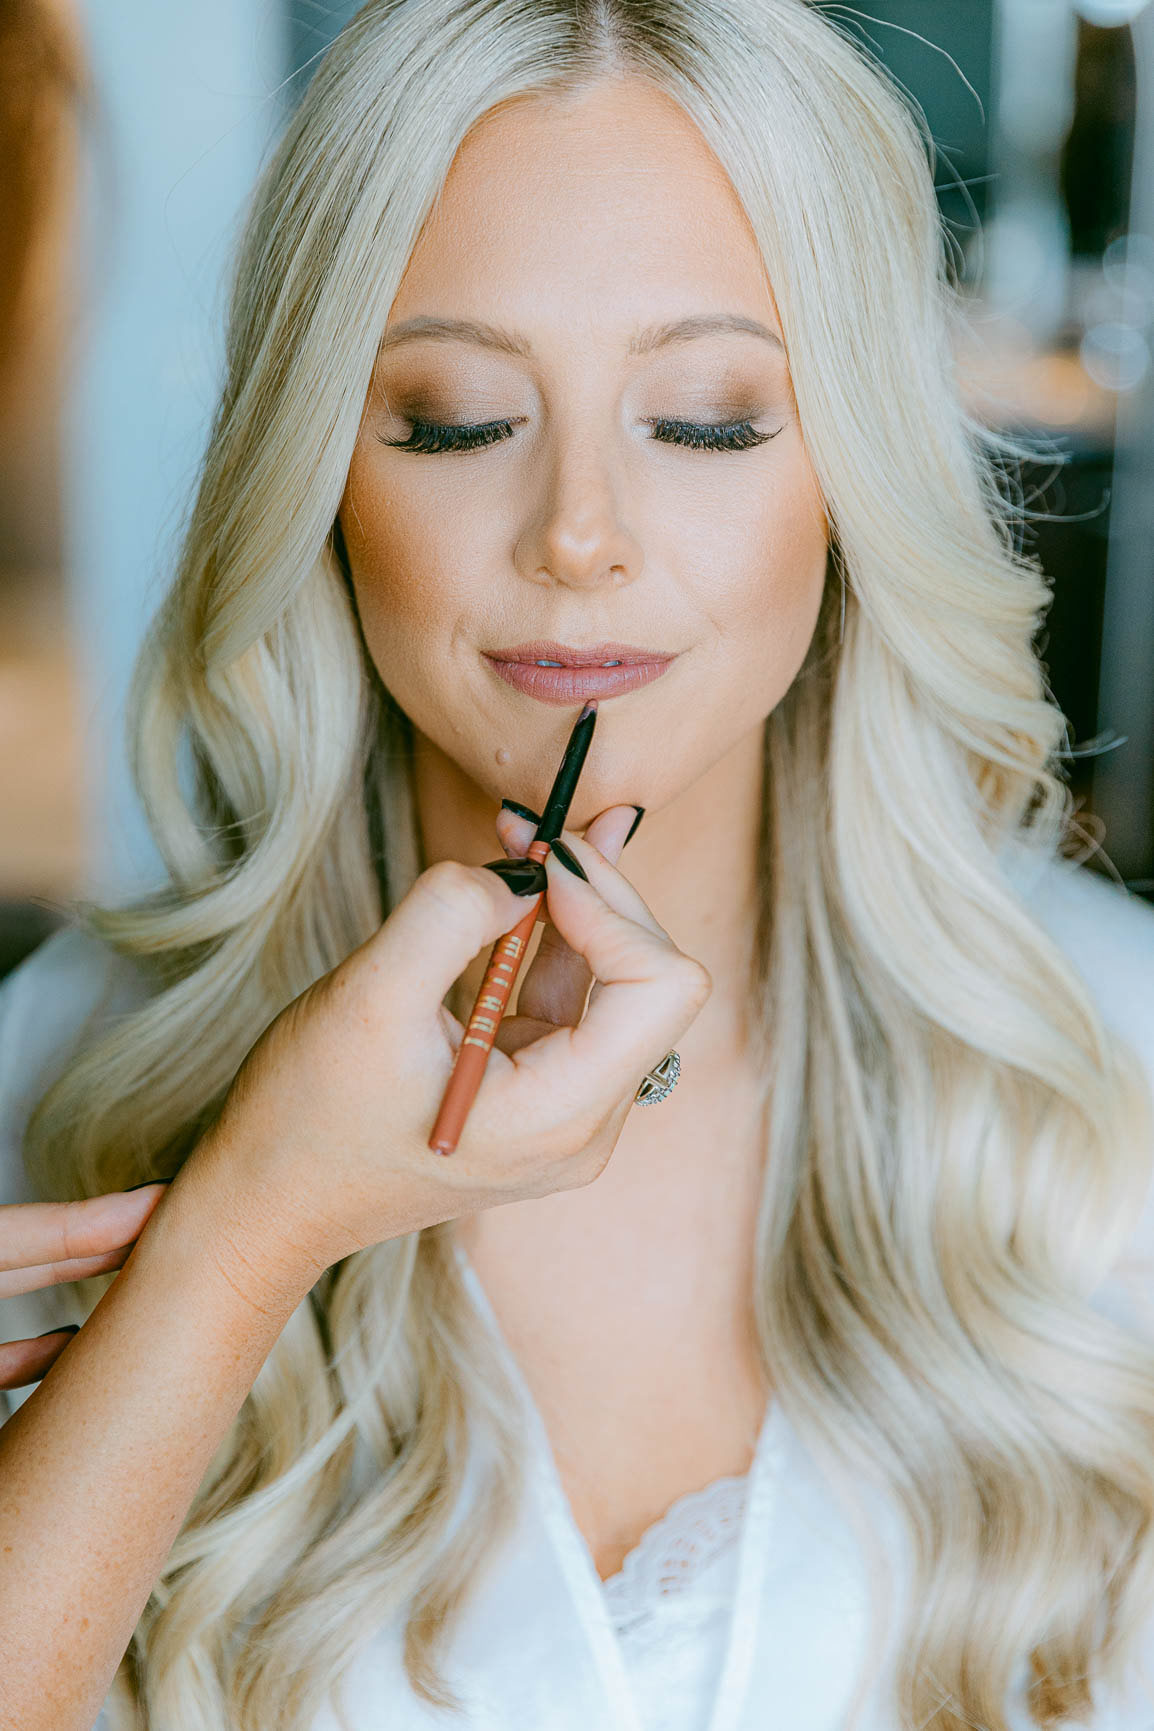 Bride wedding getting makeup done in uptown Charlotte shot by Nhieu Tang Photography | nhieutang.com